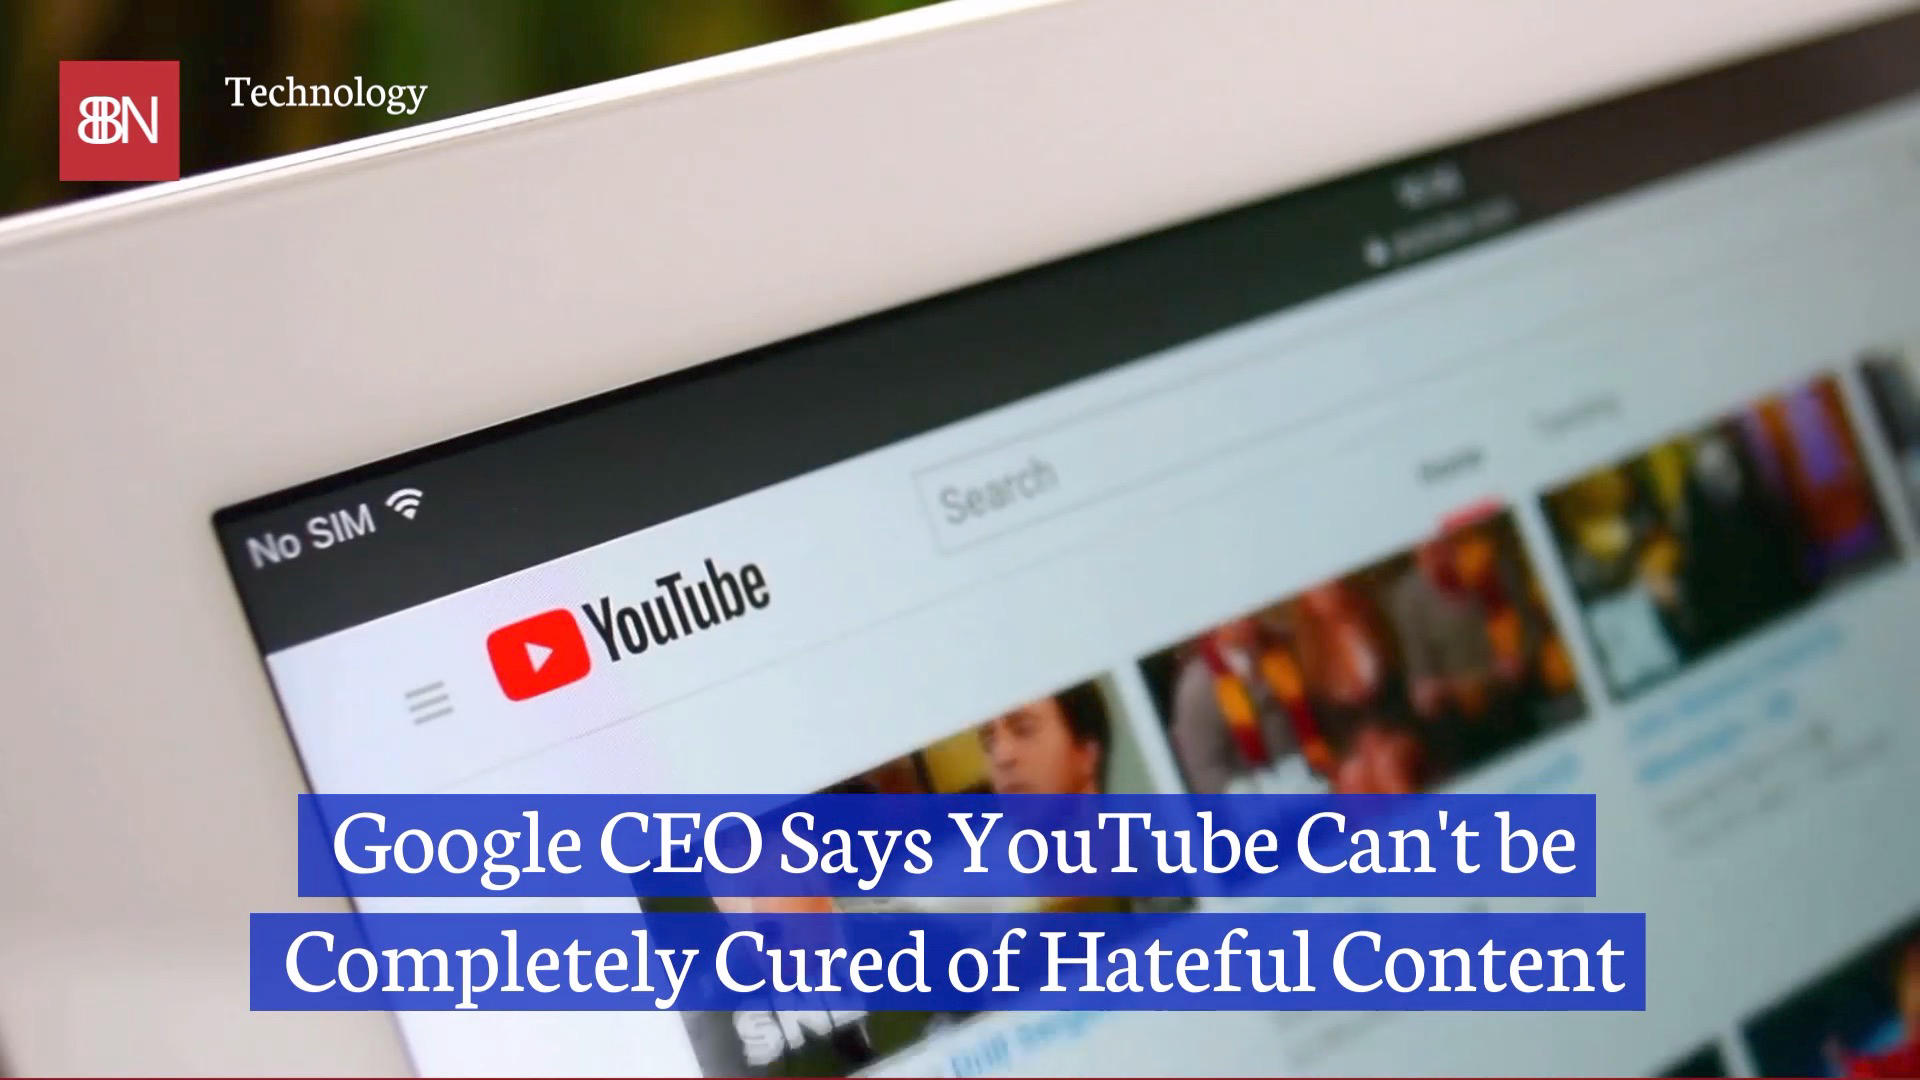 YouTube Will Always Have Hate Related Content